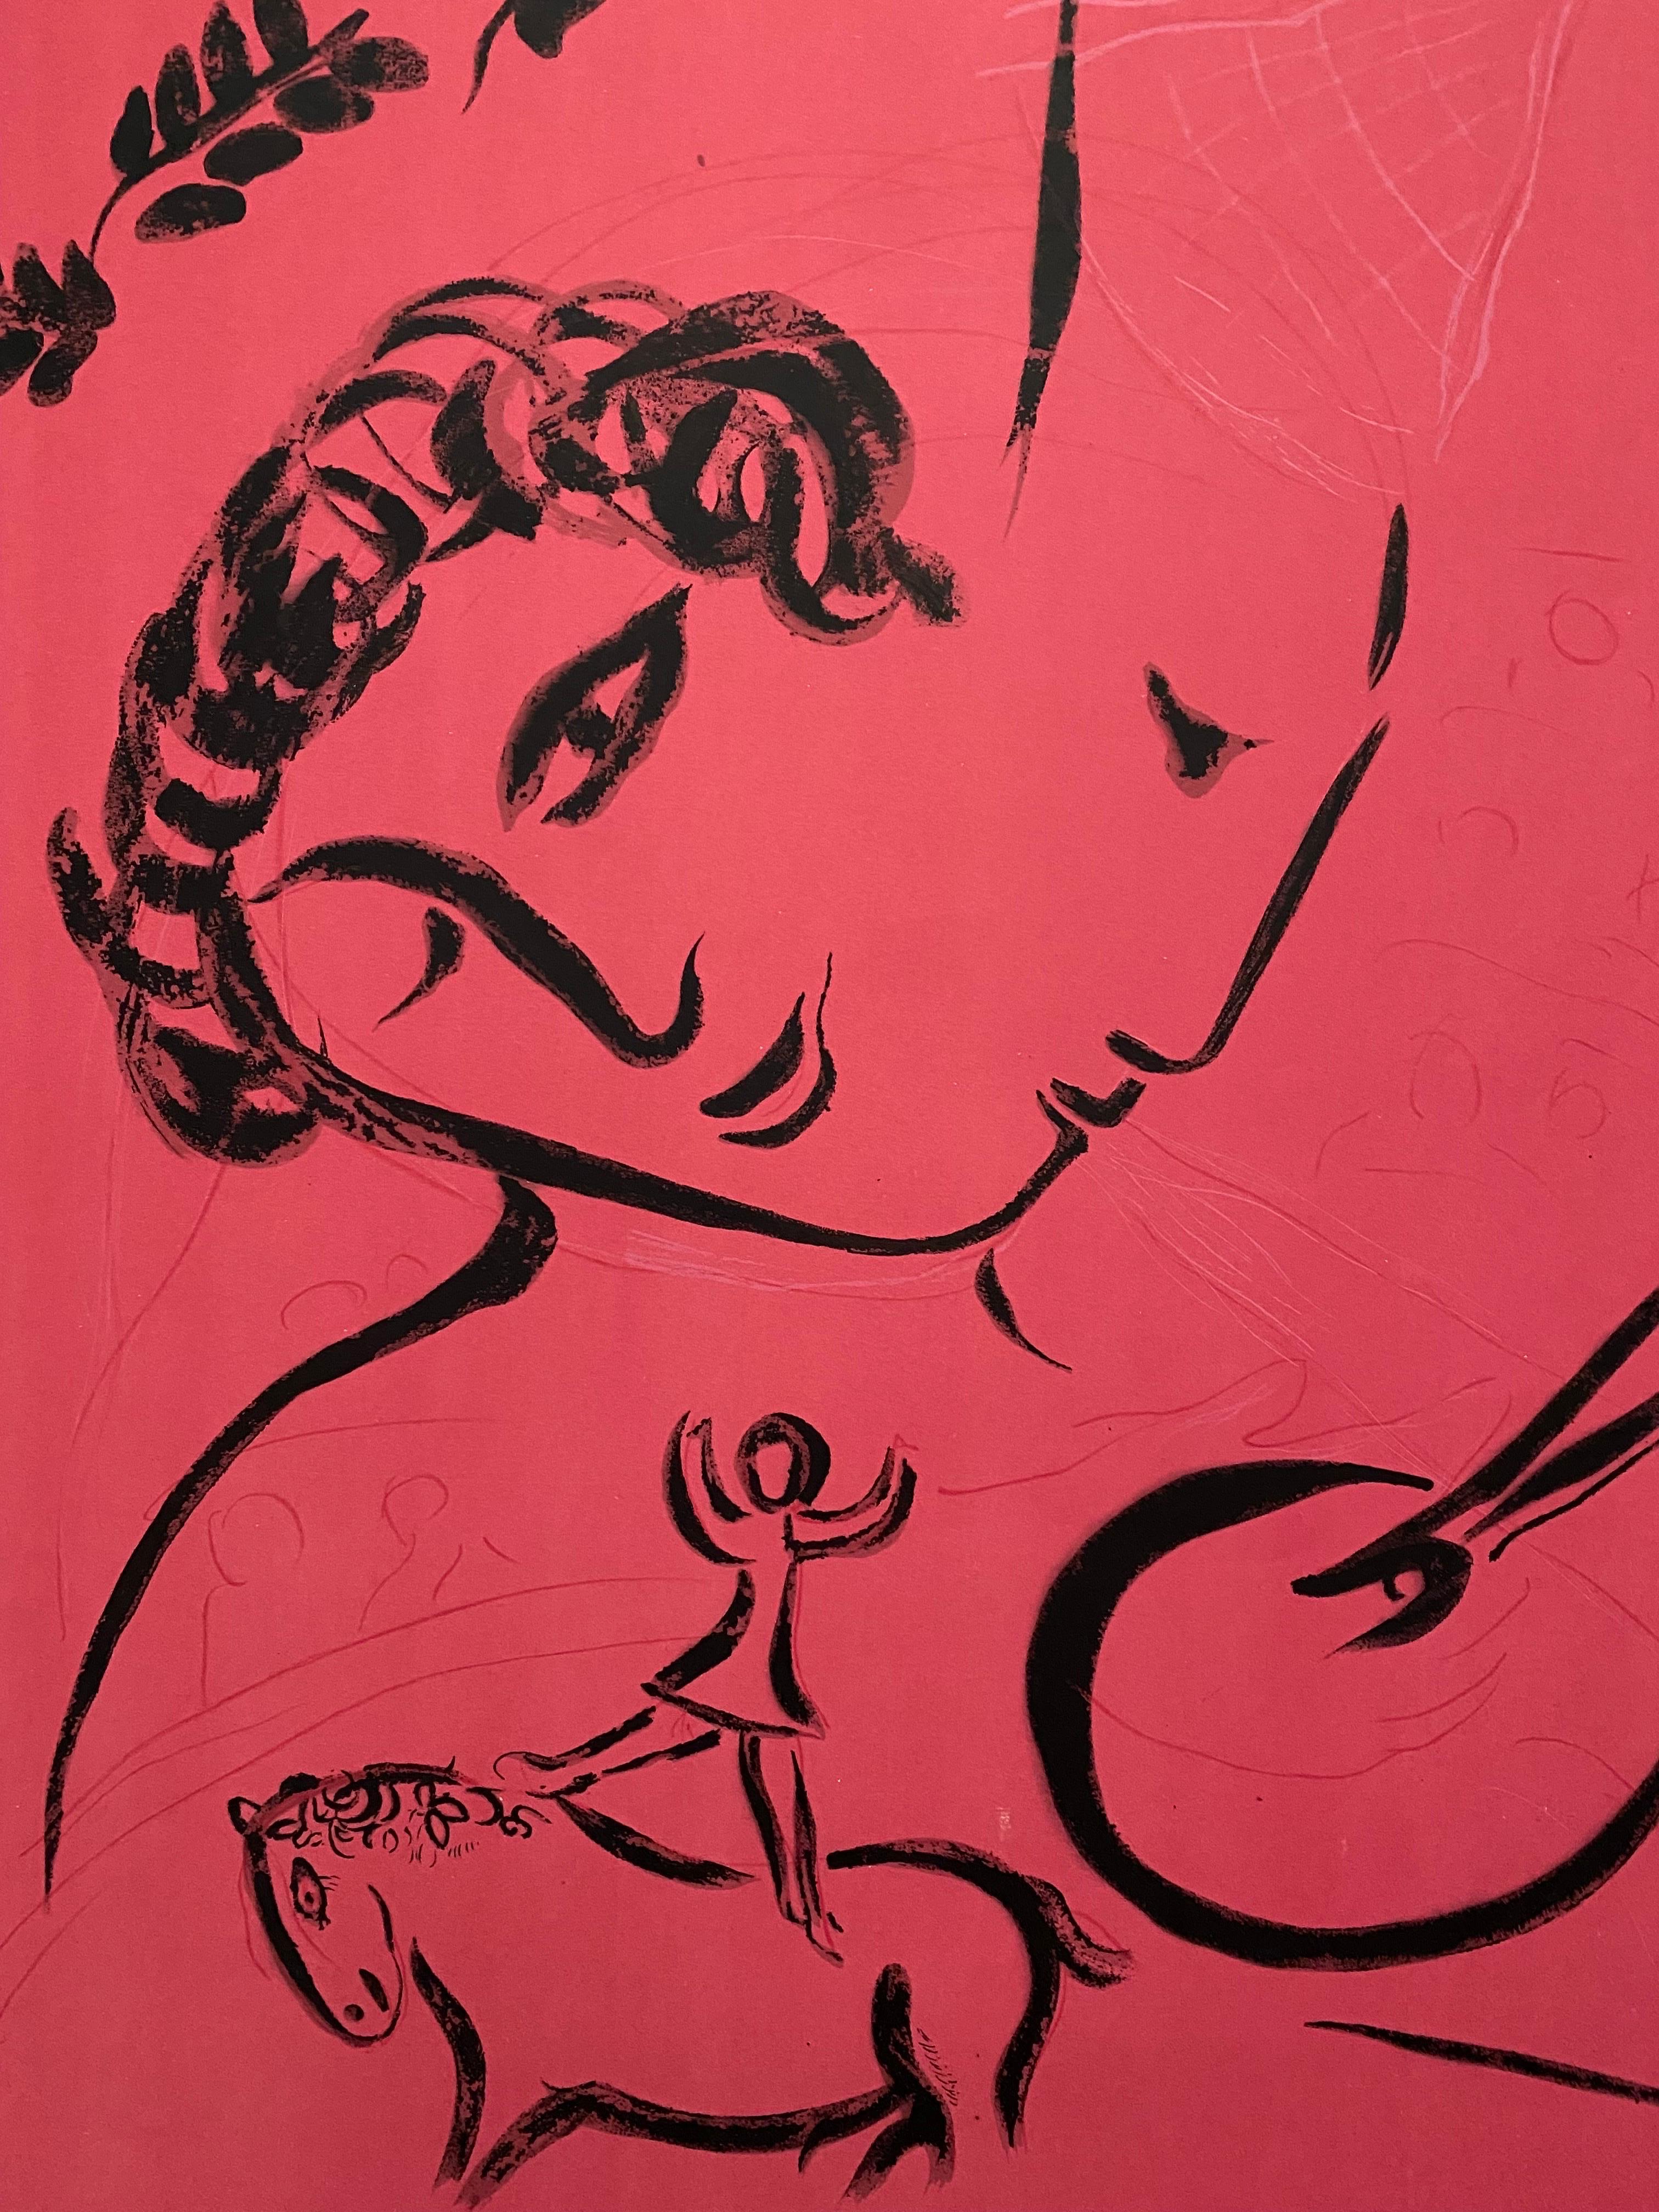 Beautiful lithographic poster after Marc Chagall's 